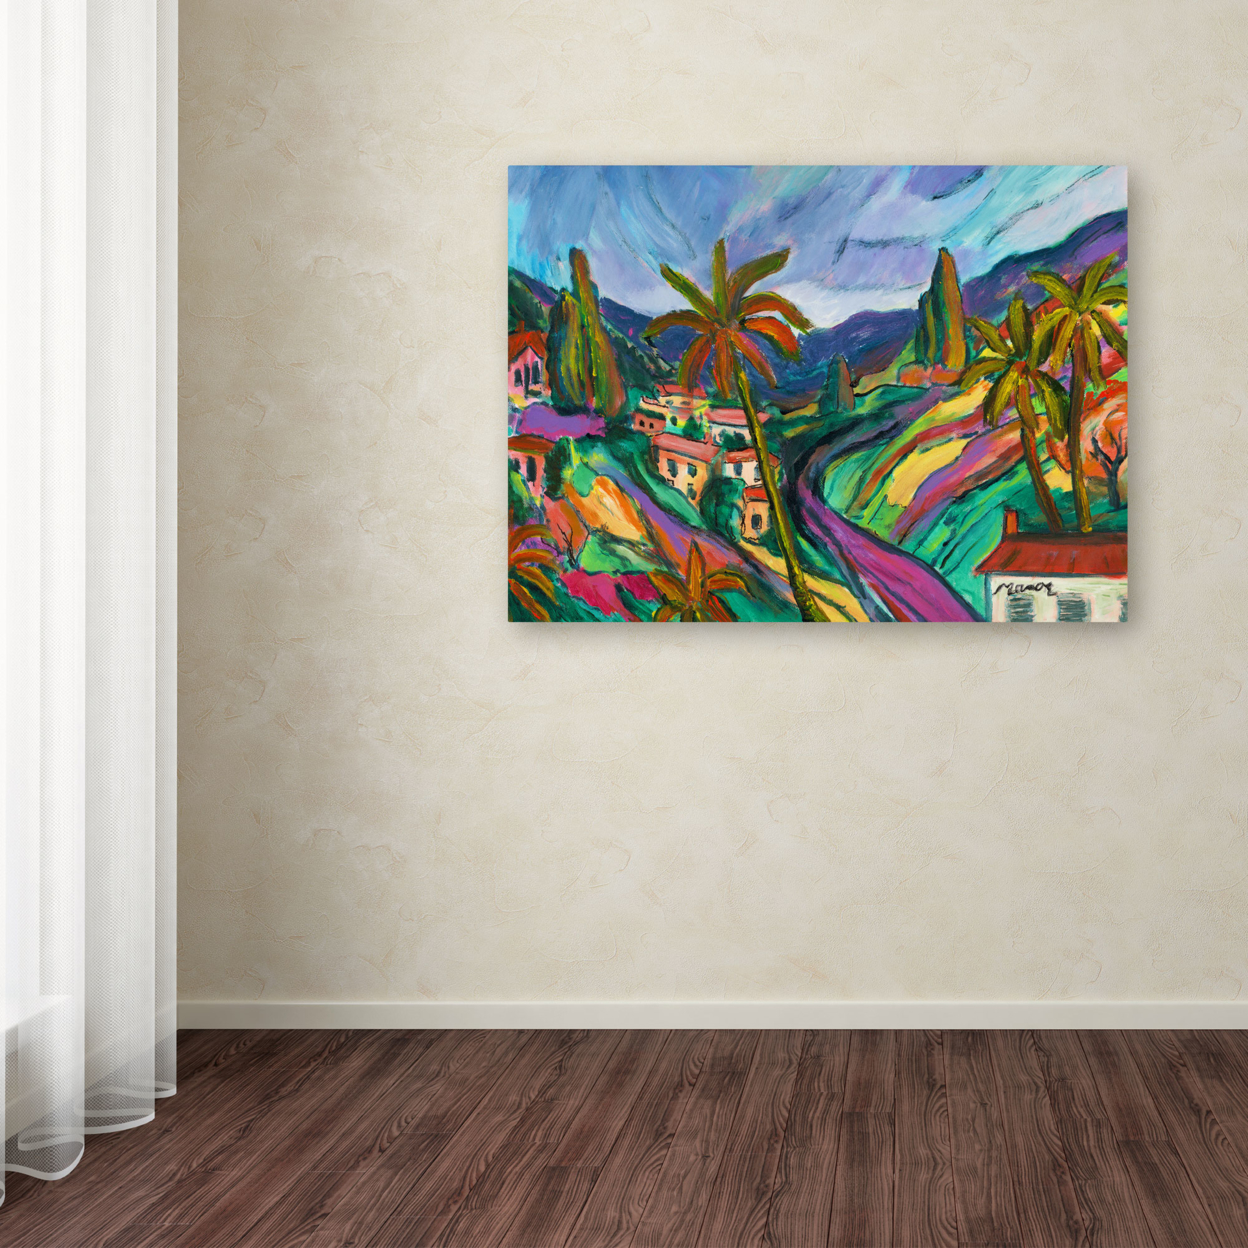 Manor Shadian 'Swept Slopes' Canvas Wall Art 35 X 47 Inches